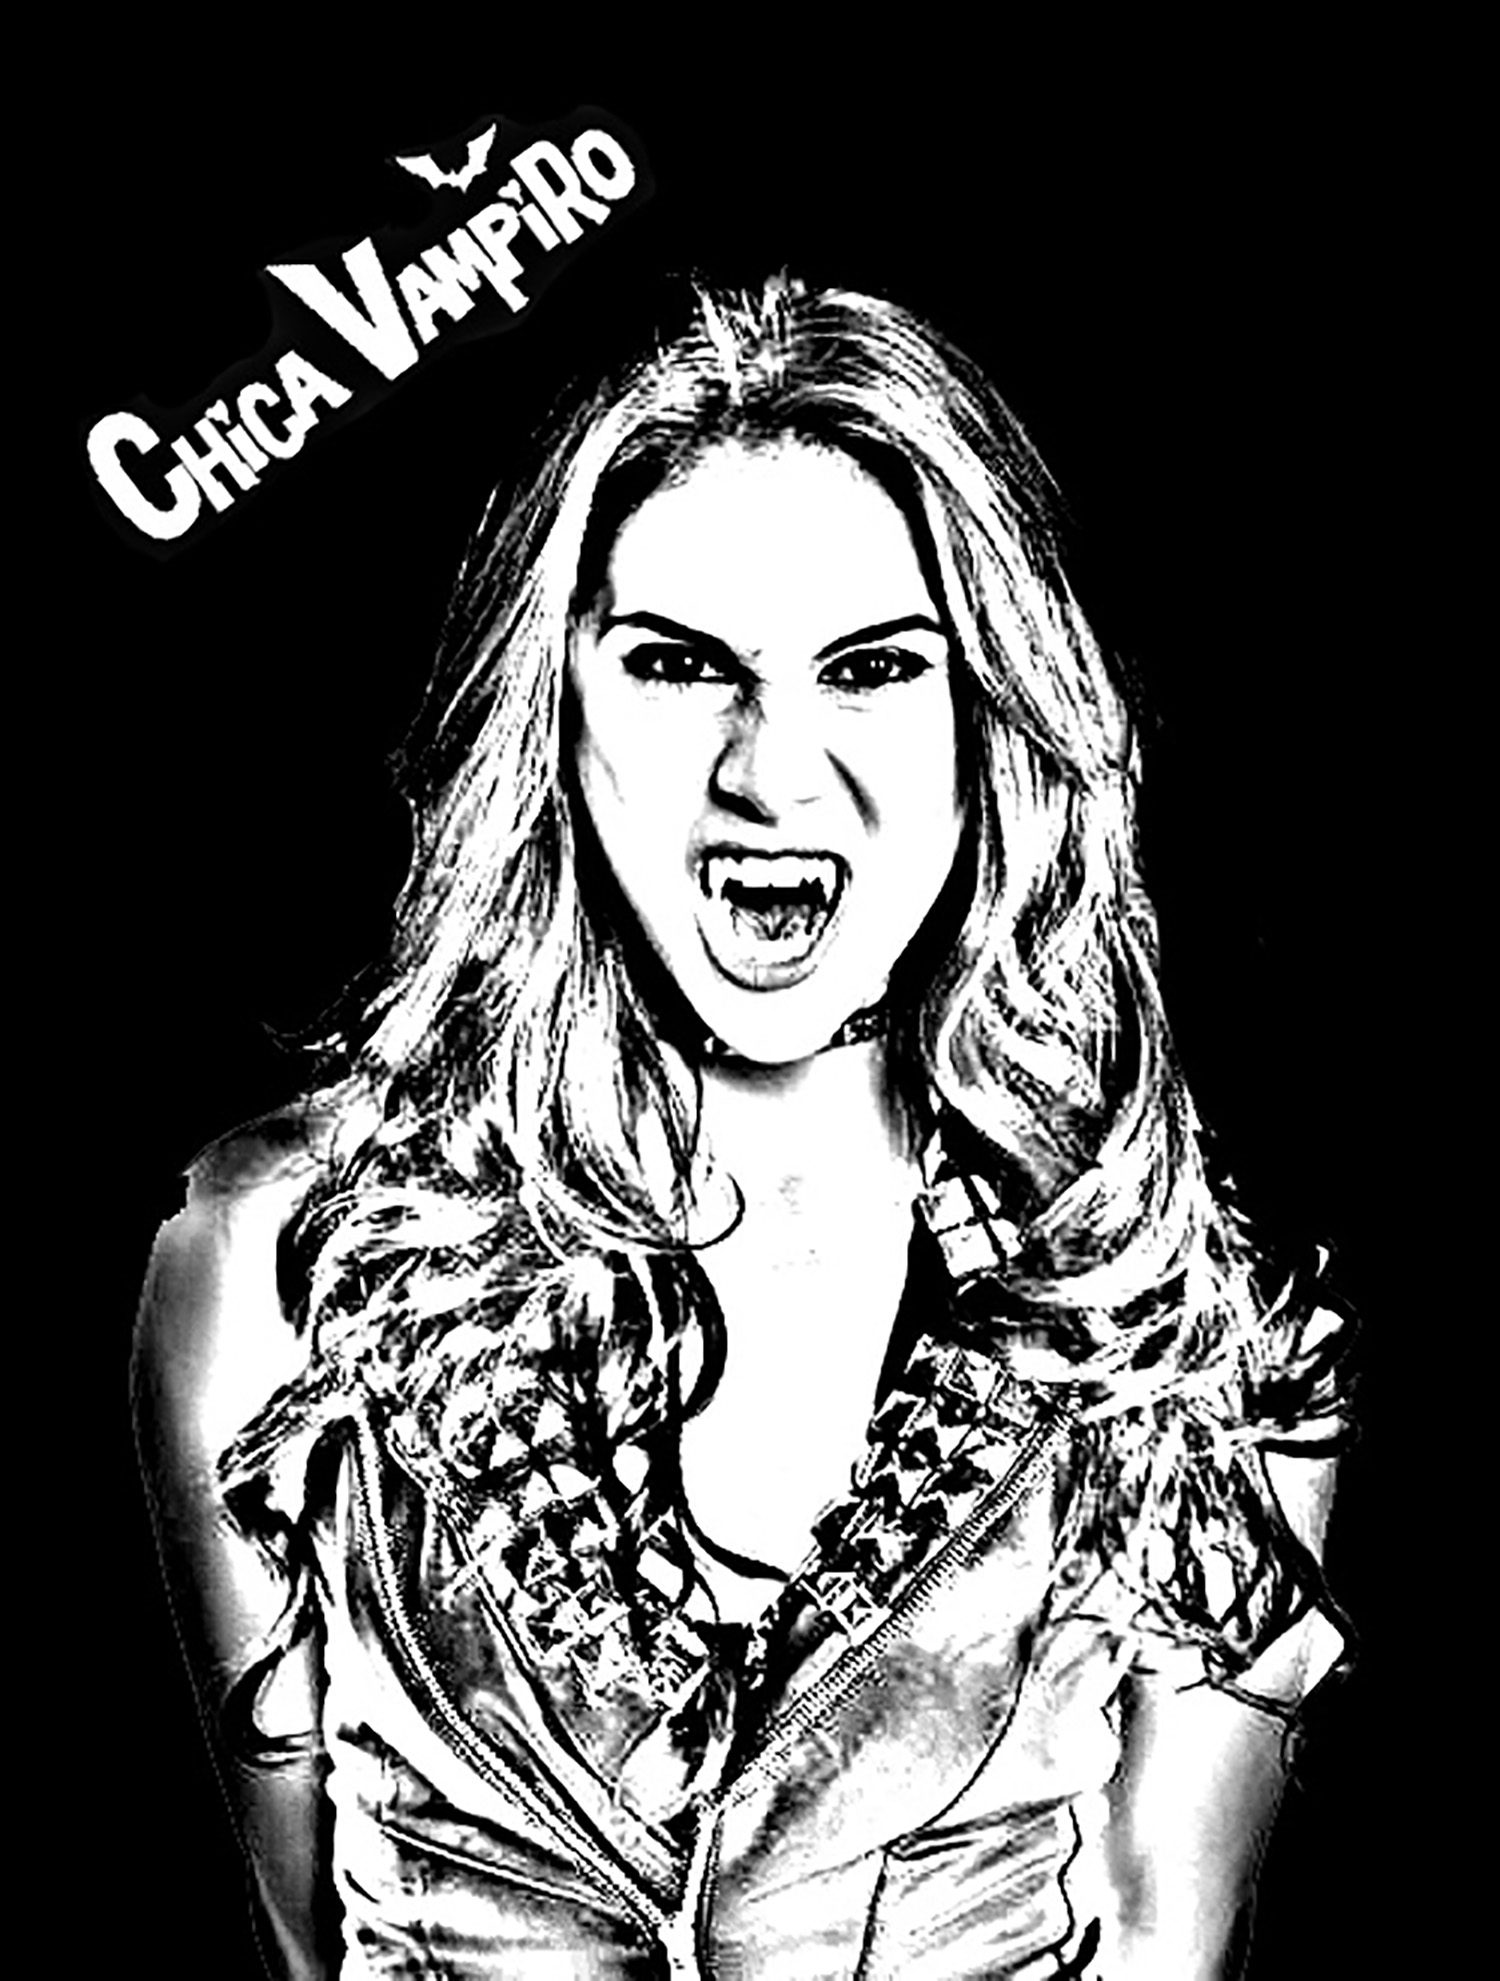 Free Chica Vampiro coloring page to download